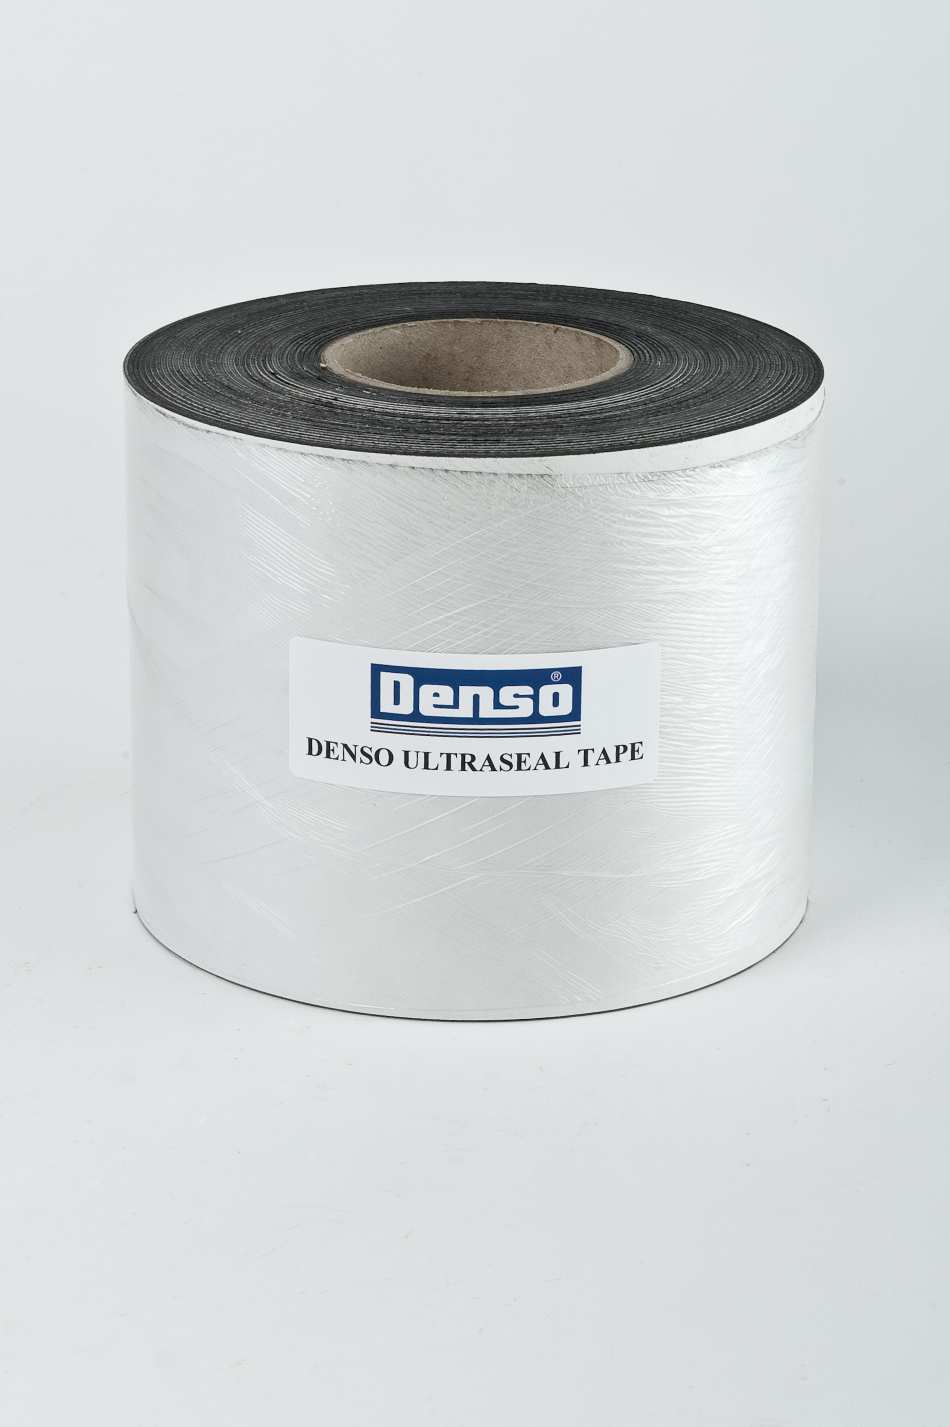 DENSO ULTRASEAL TAPE 50MM X 15M 